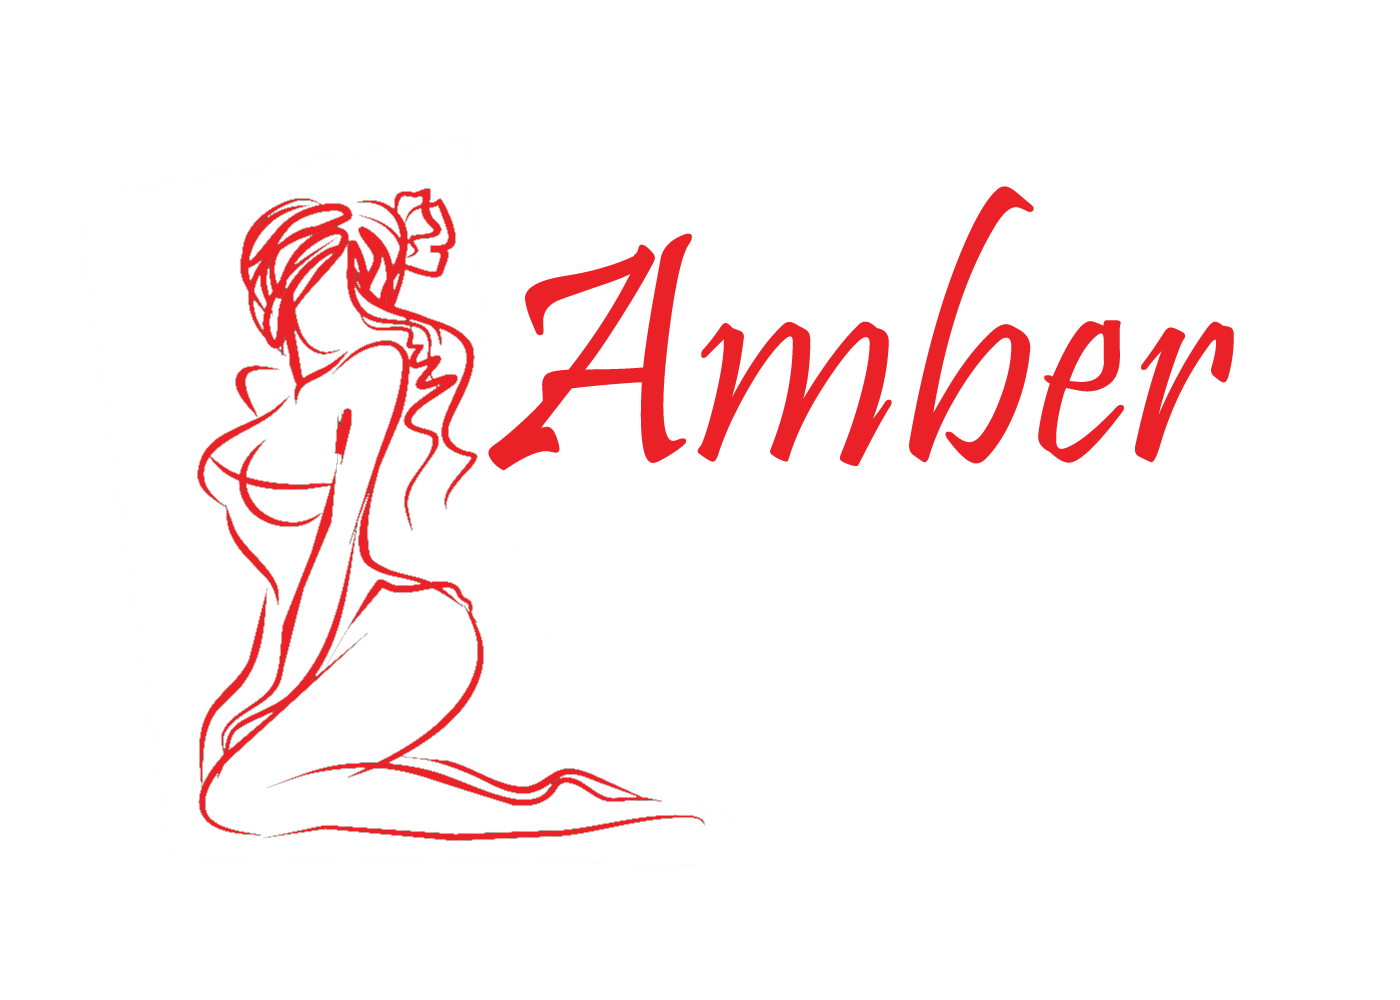 Amber White Strippers & Bucks Party Ideas